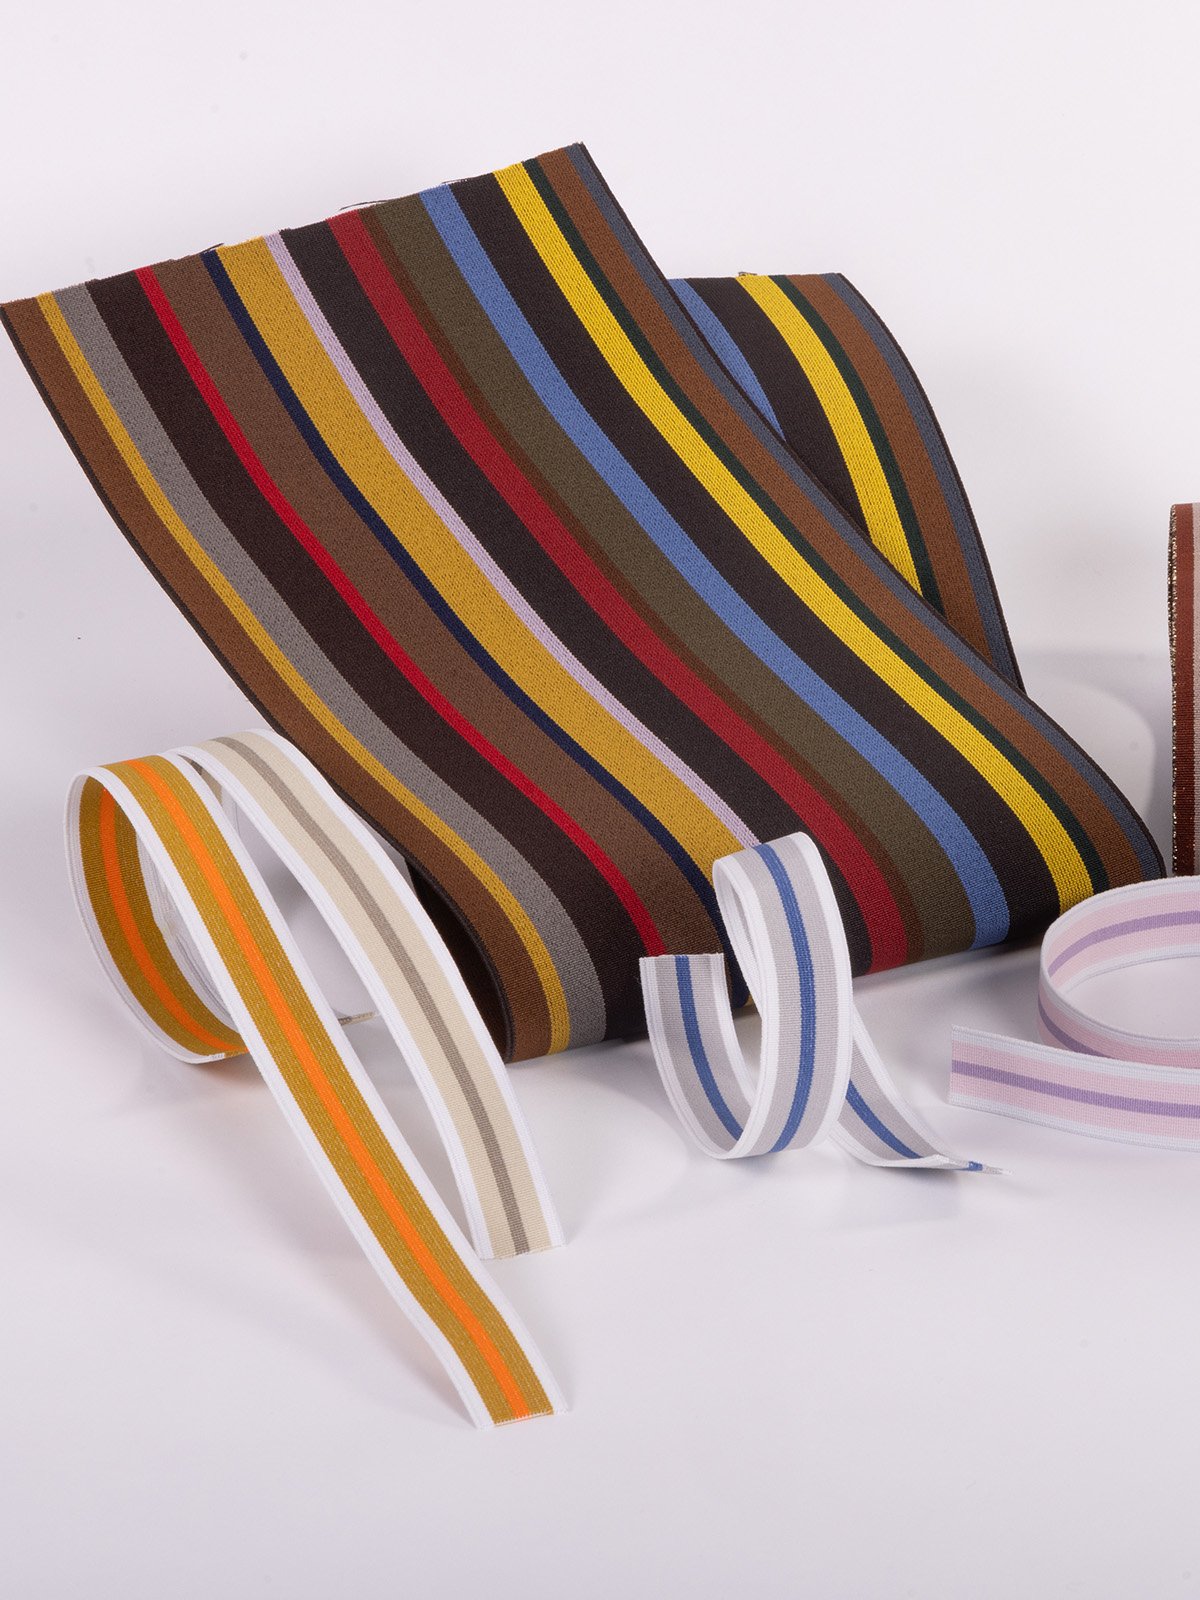 Flex Tex, new entry for furniture and packaging